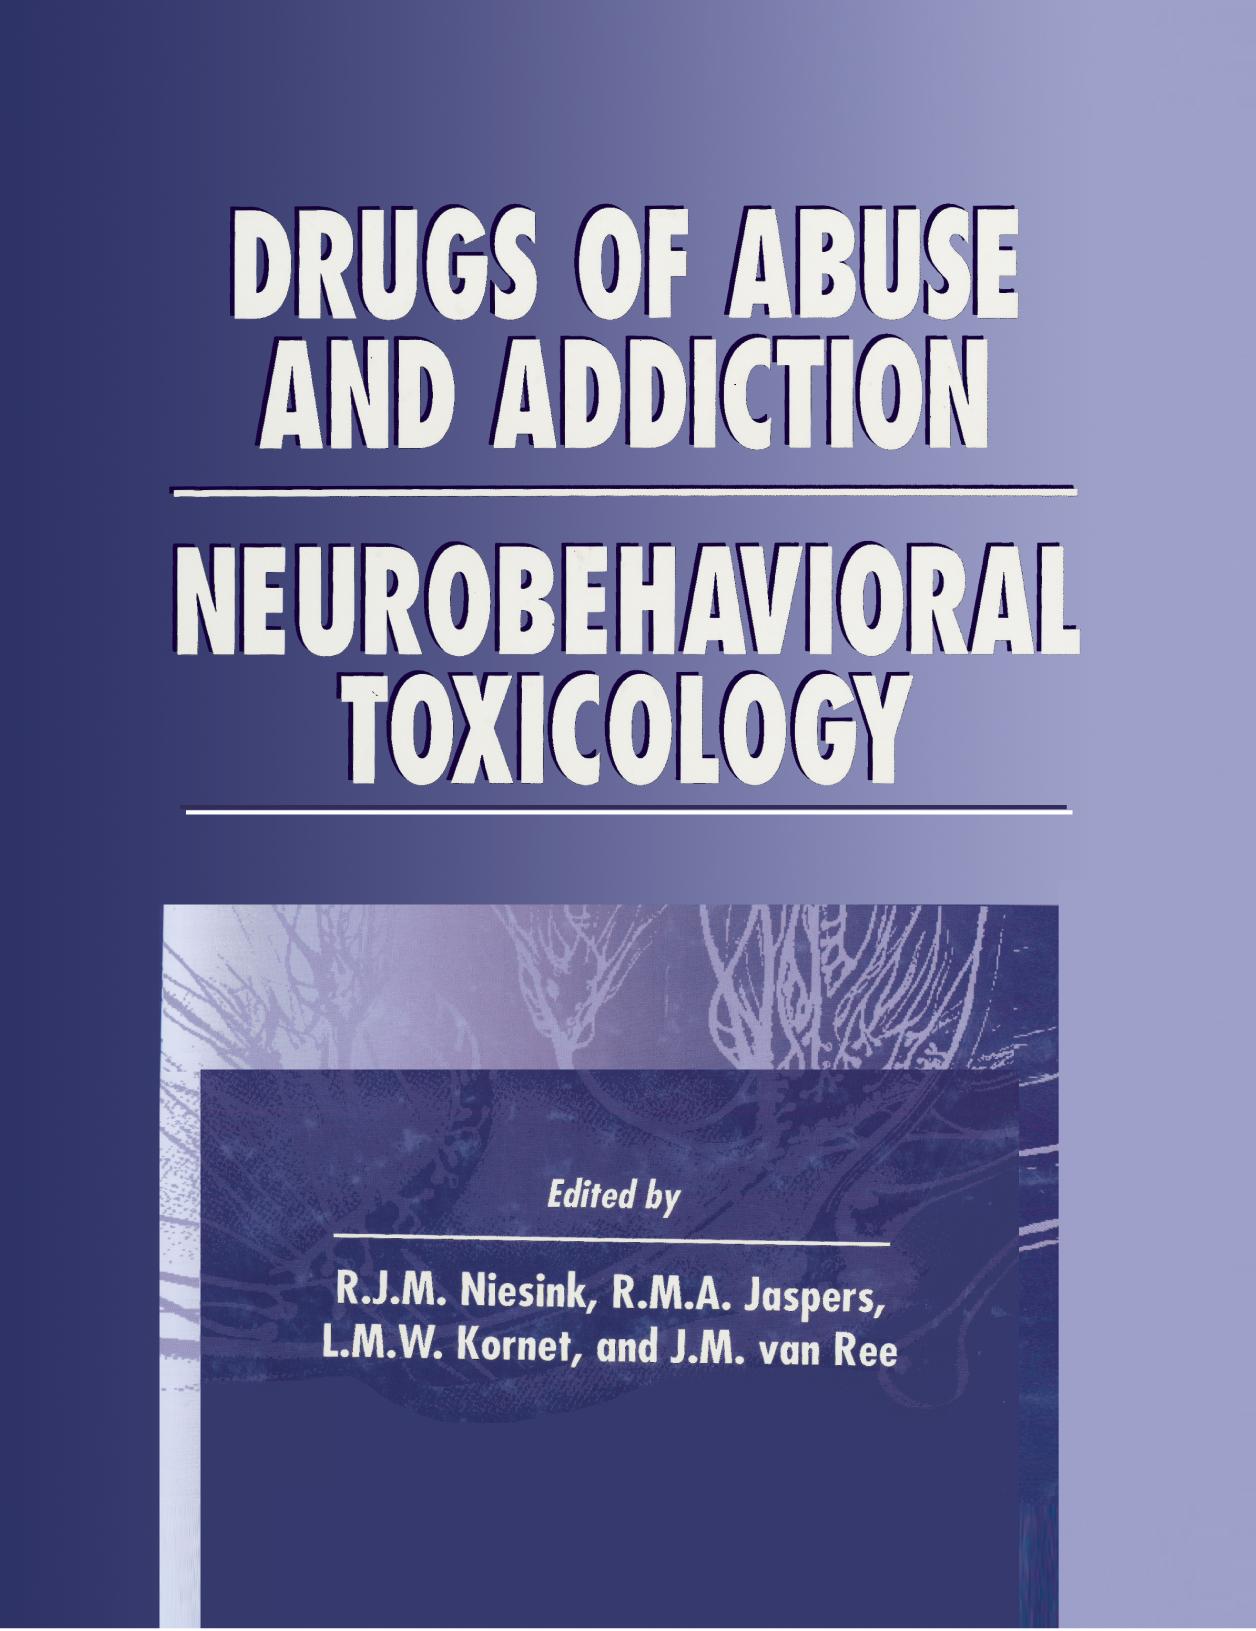 Drugs of abuse and addiction : neurobehavioral toxicology